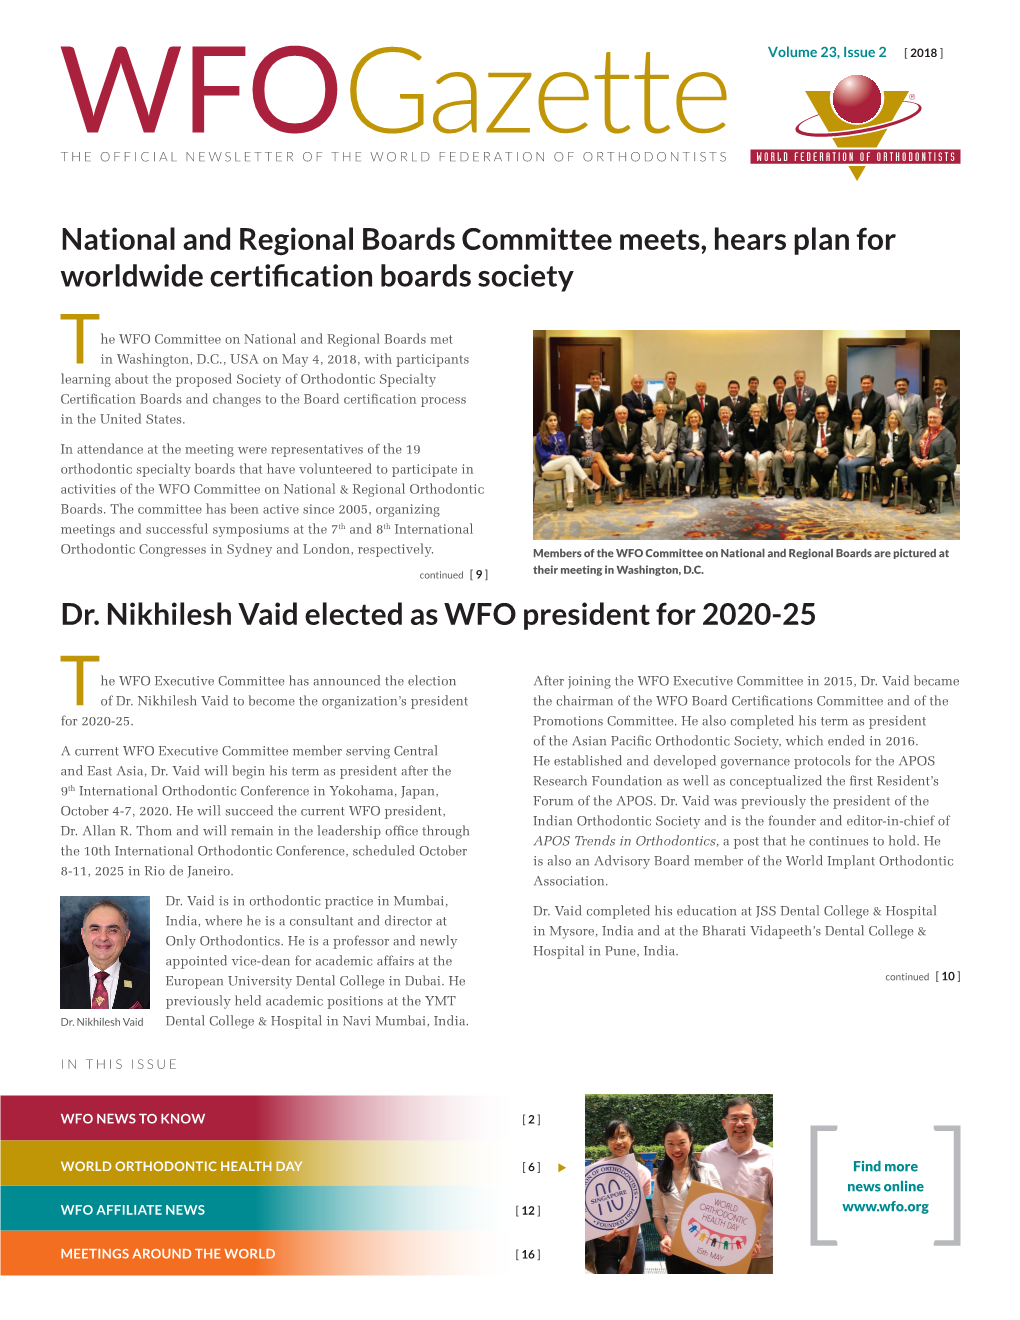 National and Regional Boards Committee Meets, Hears Plan for Worldwide Certification Boards Society